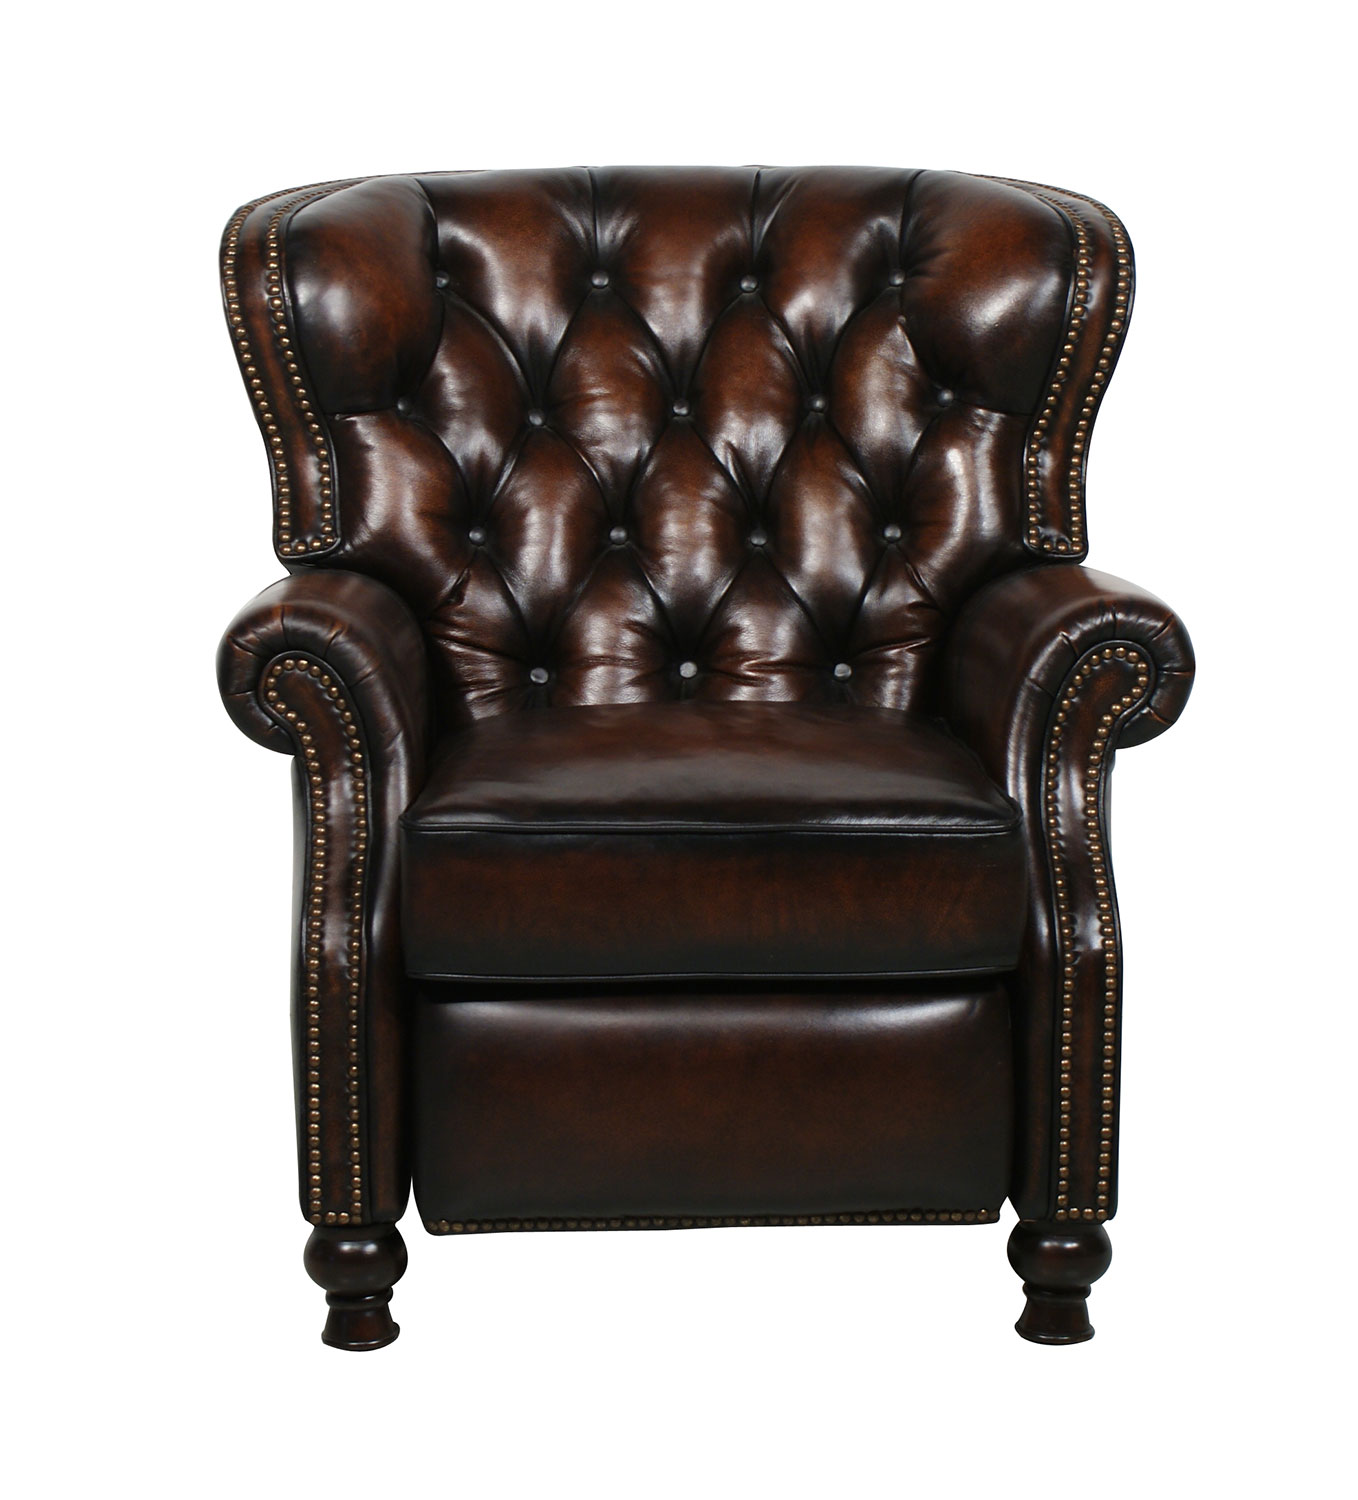 Barcalounger Presidental ll Vintage Reserve Leather Recliner - Coffee